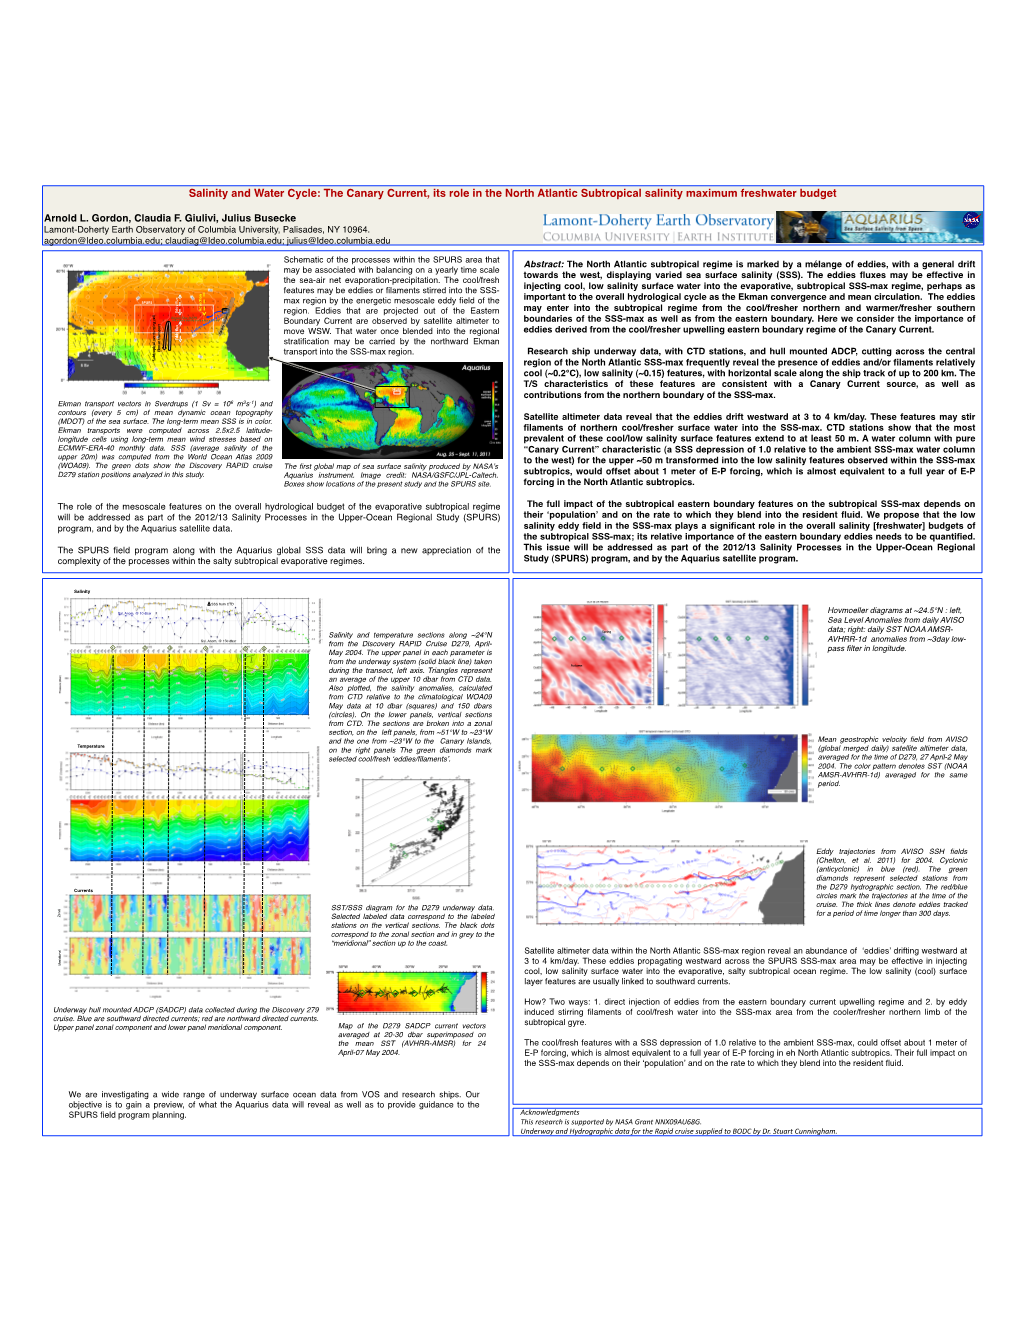 The Canary Current, Its Role in the North Atlantic Subtropical Salinity Maximum Freshwater Budget